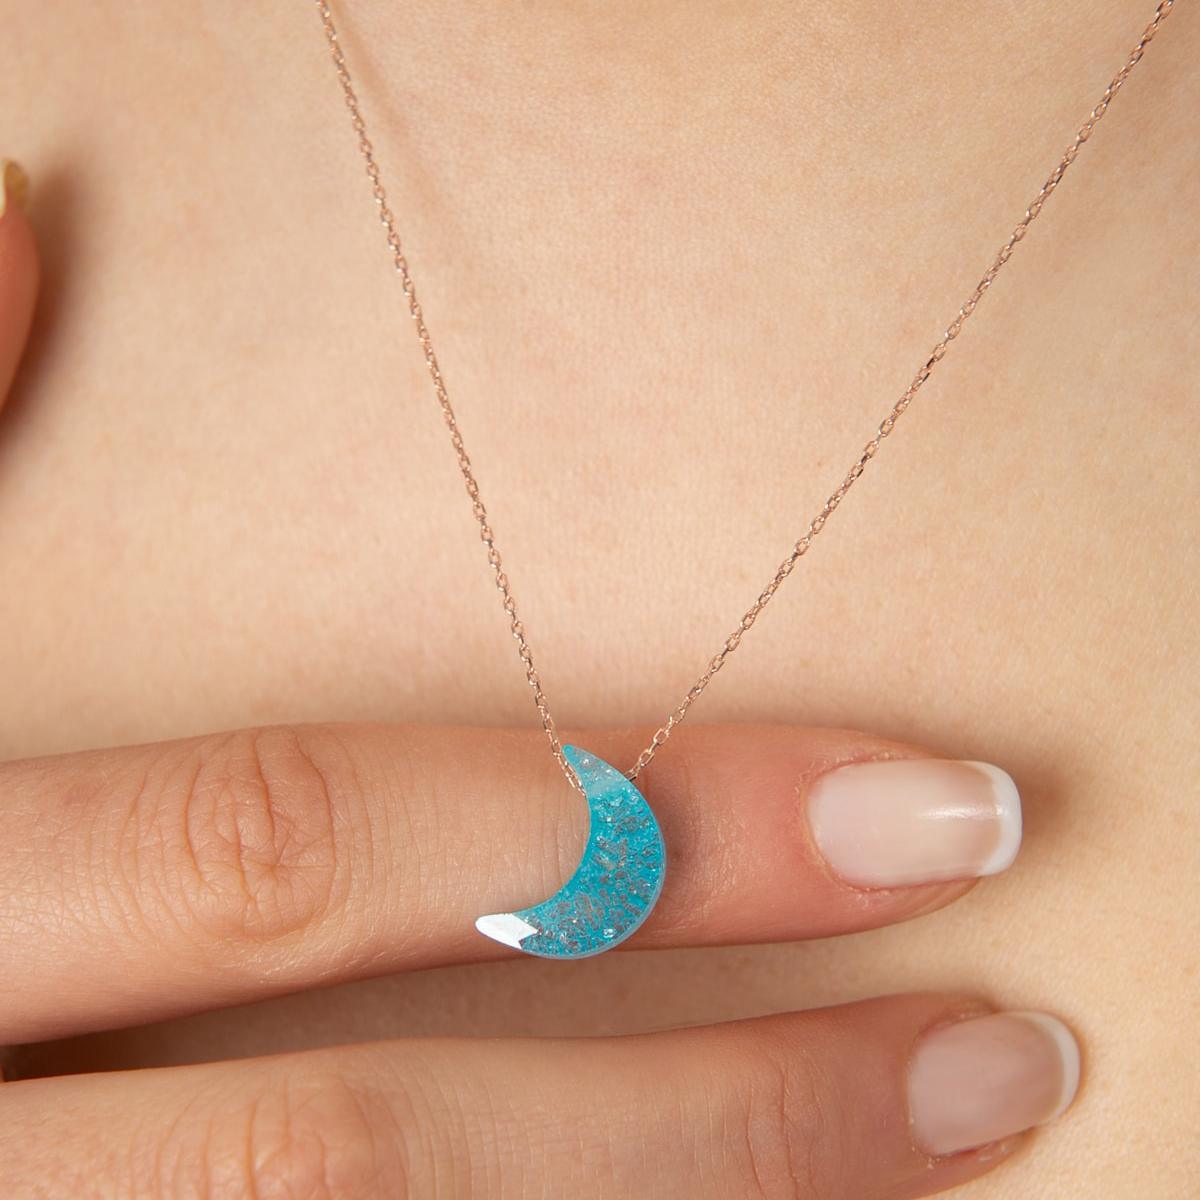 Blue Turquoise Moon Crescent Necklace • Turquoise Necklace Pendant - Trending Silver Gifts